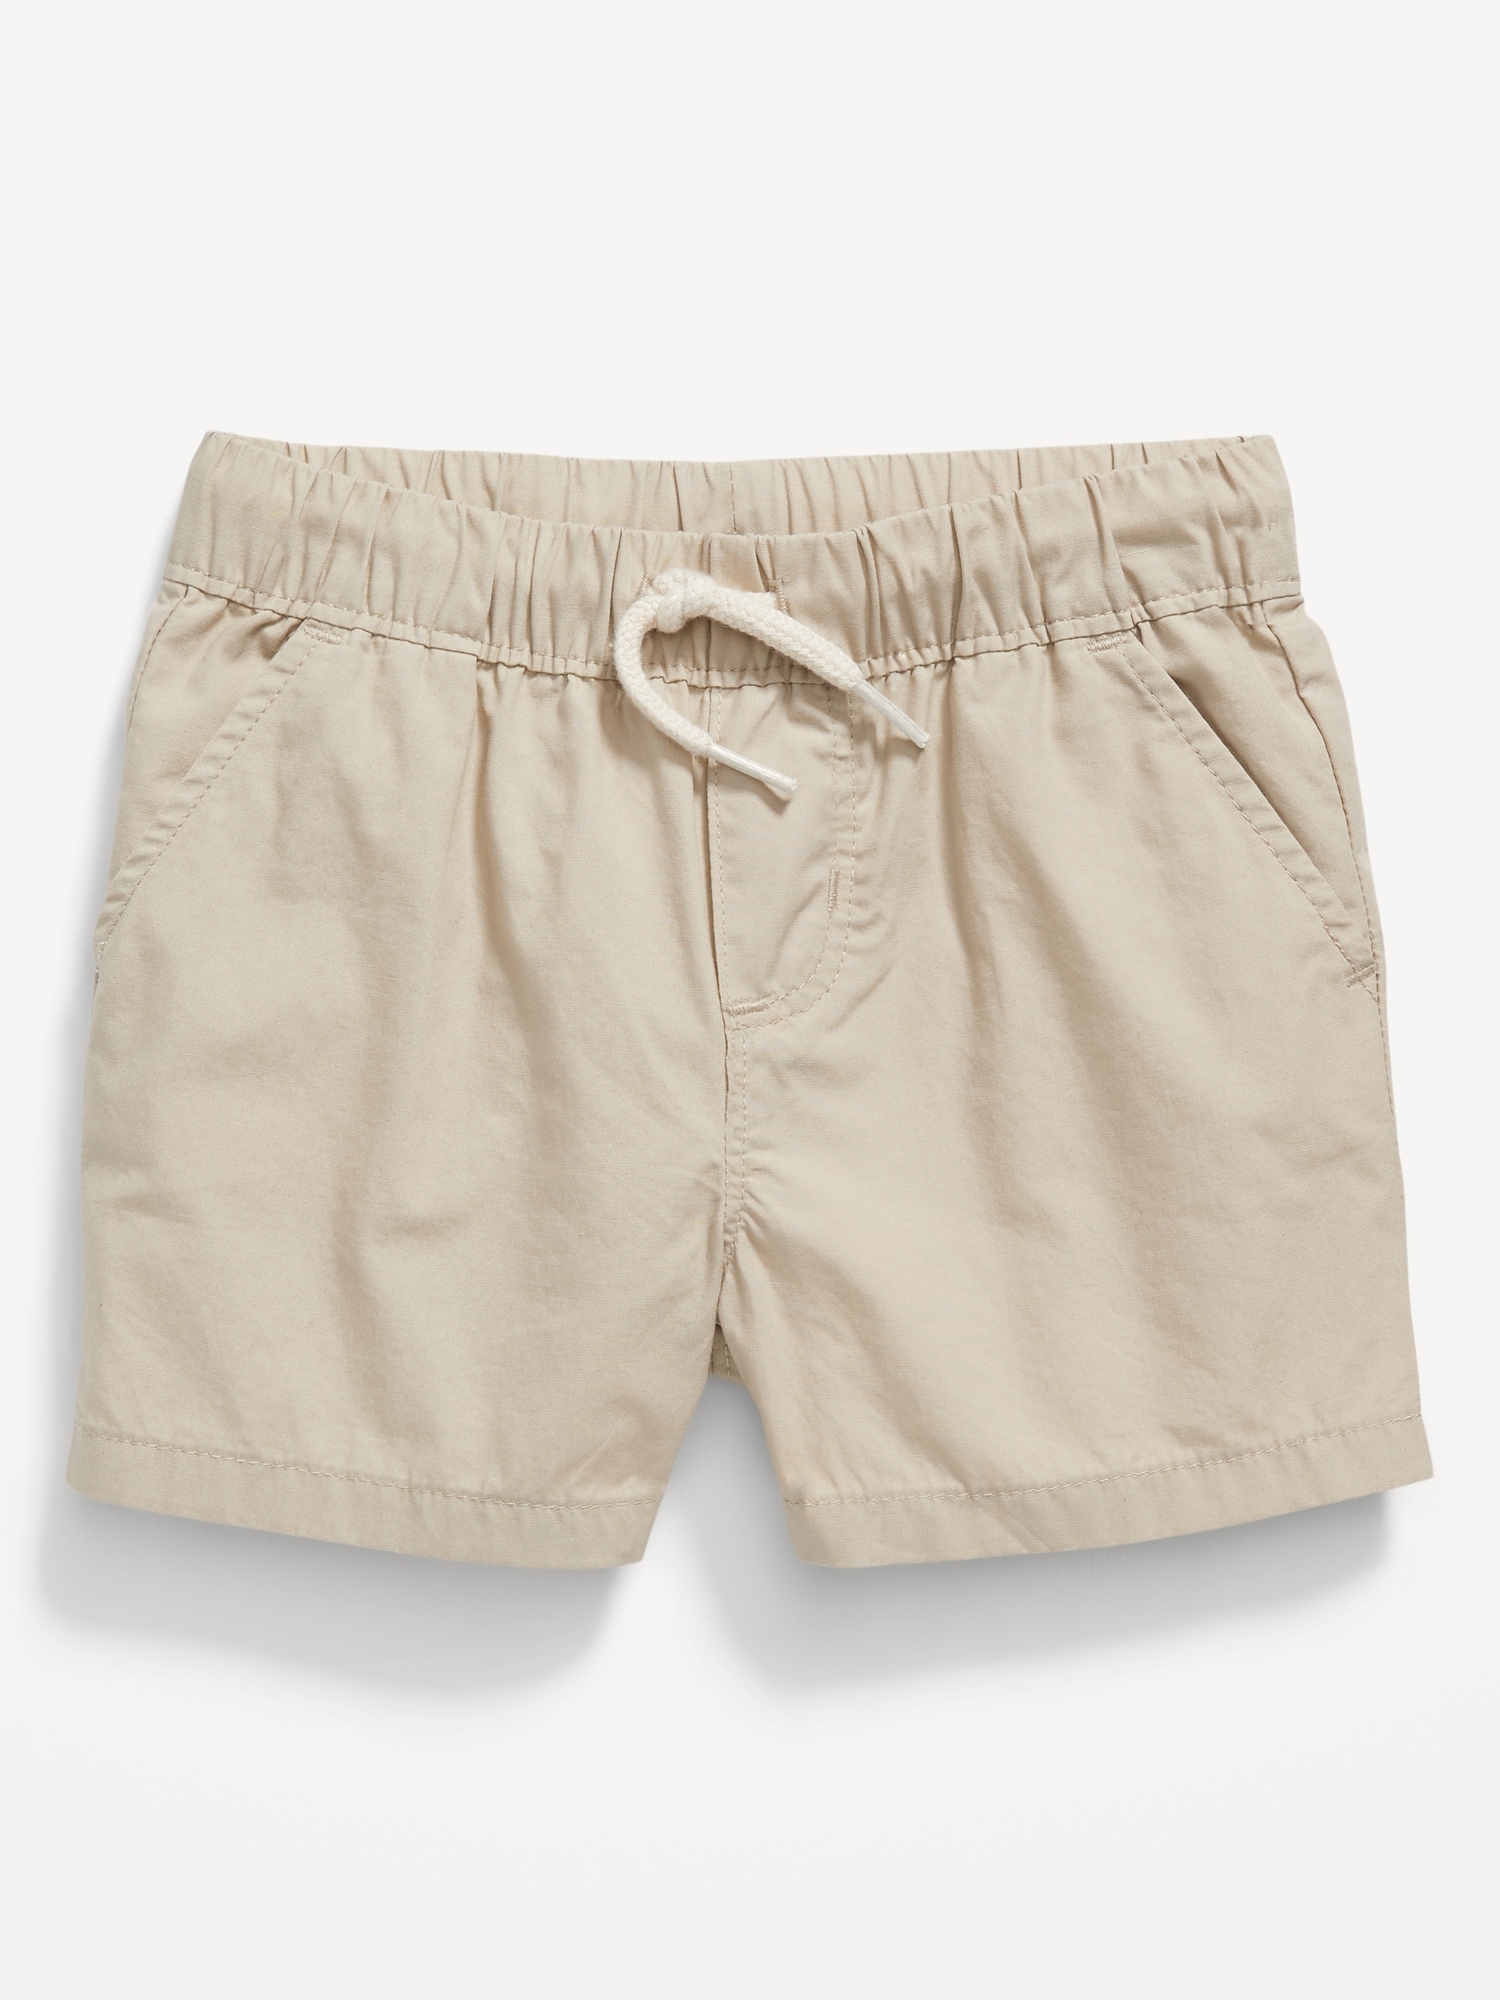 Unisex Cotton Poplin Pull-On Shorts for Baby | Old Navy